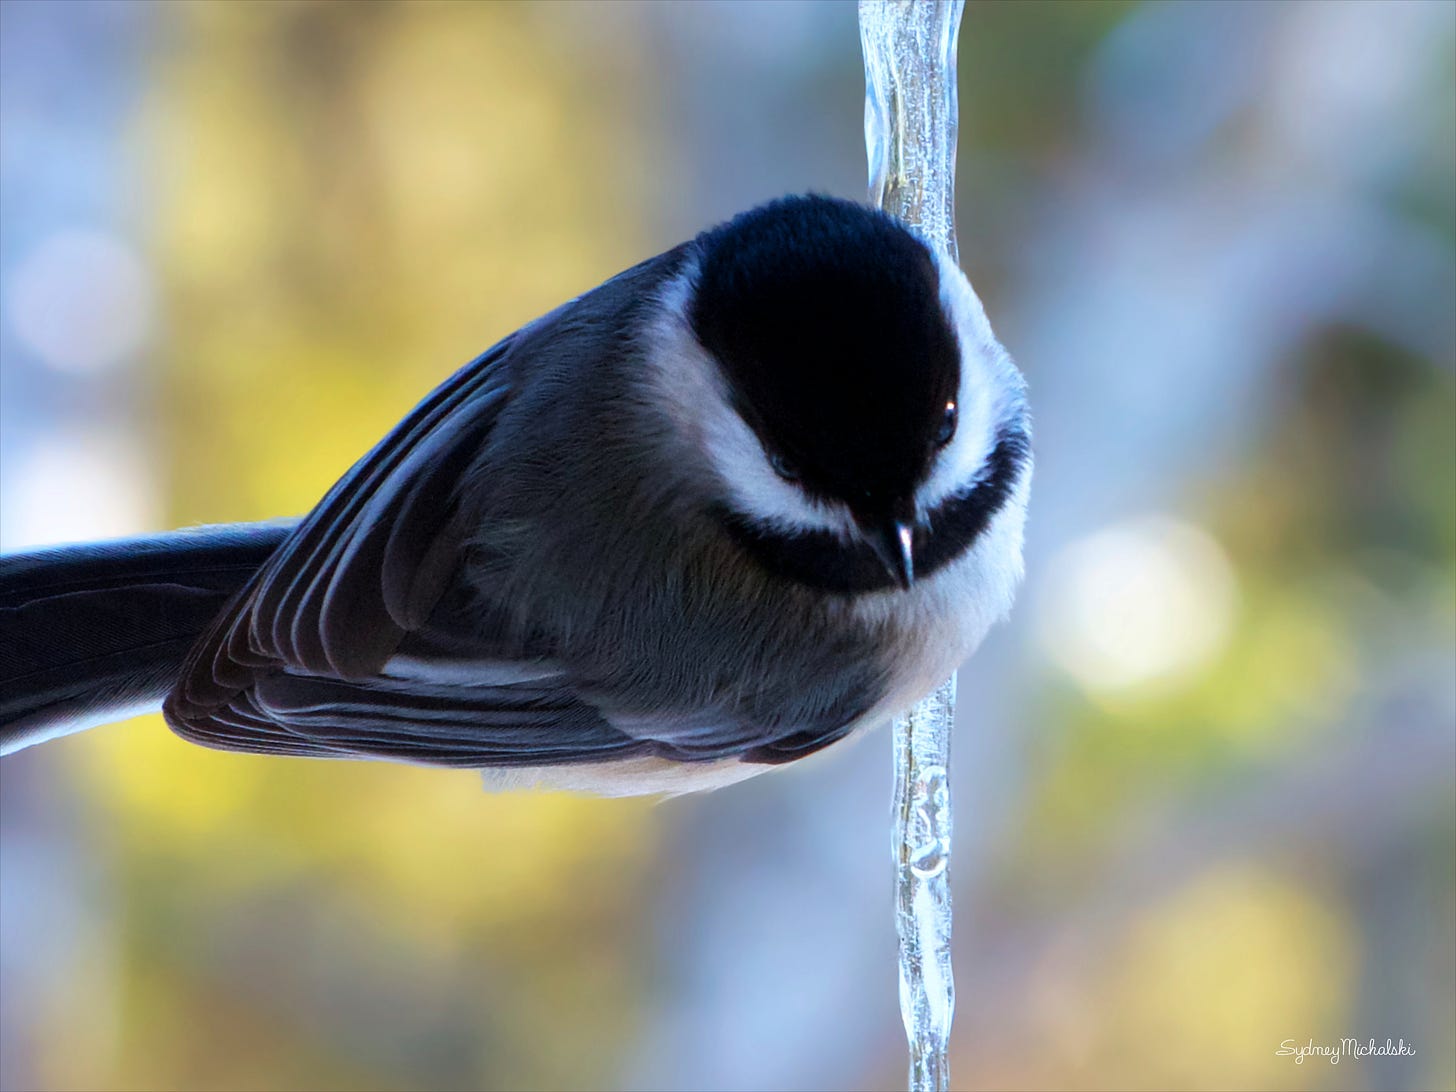 A close-up of a Black-capped Chickadee perching on an icicle.